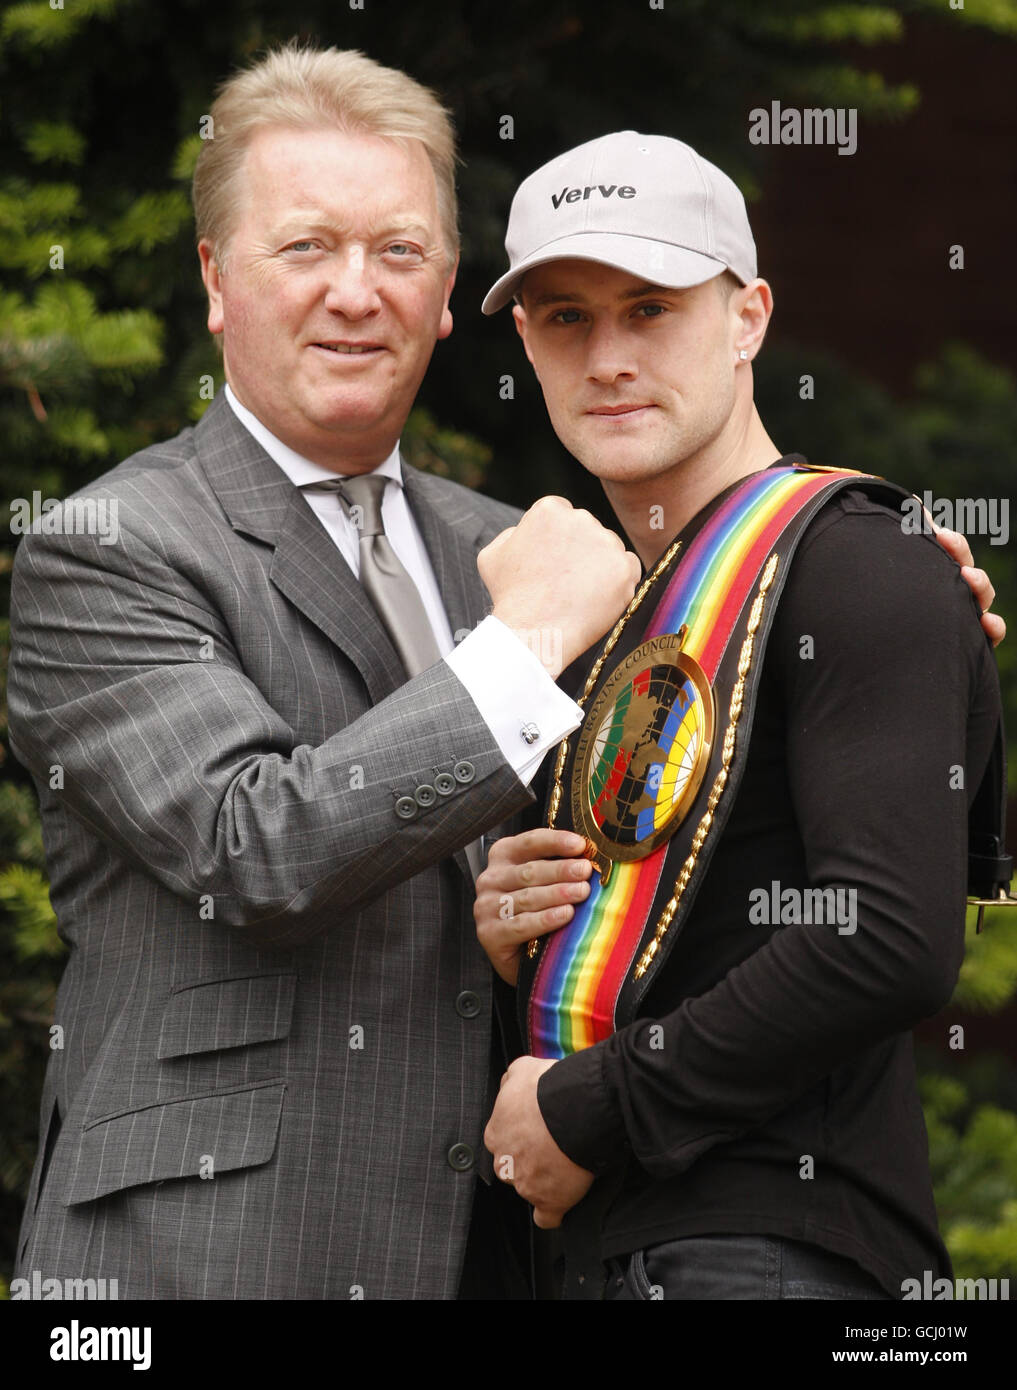 Boxing - Ricky Burns Photocall - Glasgow. Boxer Ricky Burns (right) and Promoter Frank Warren following a press conference at the Marriott Hotel in Glasgow. Stock Photo